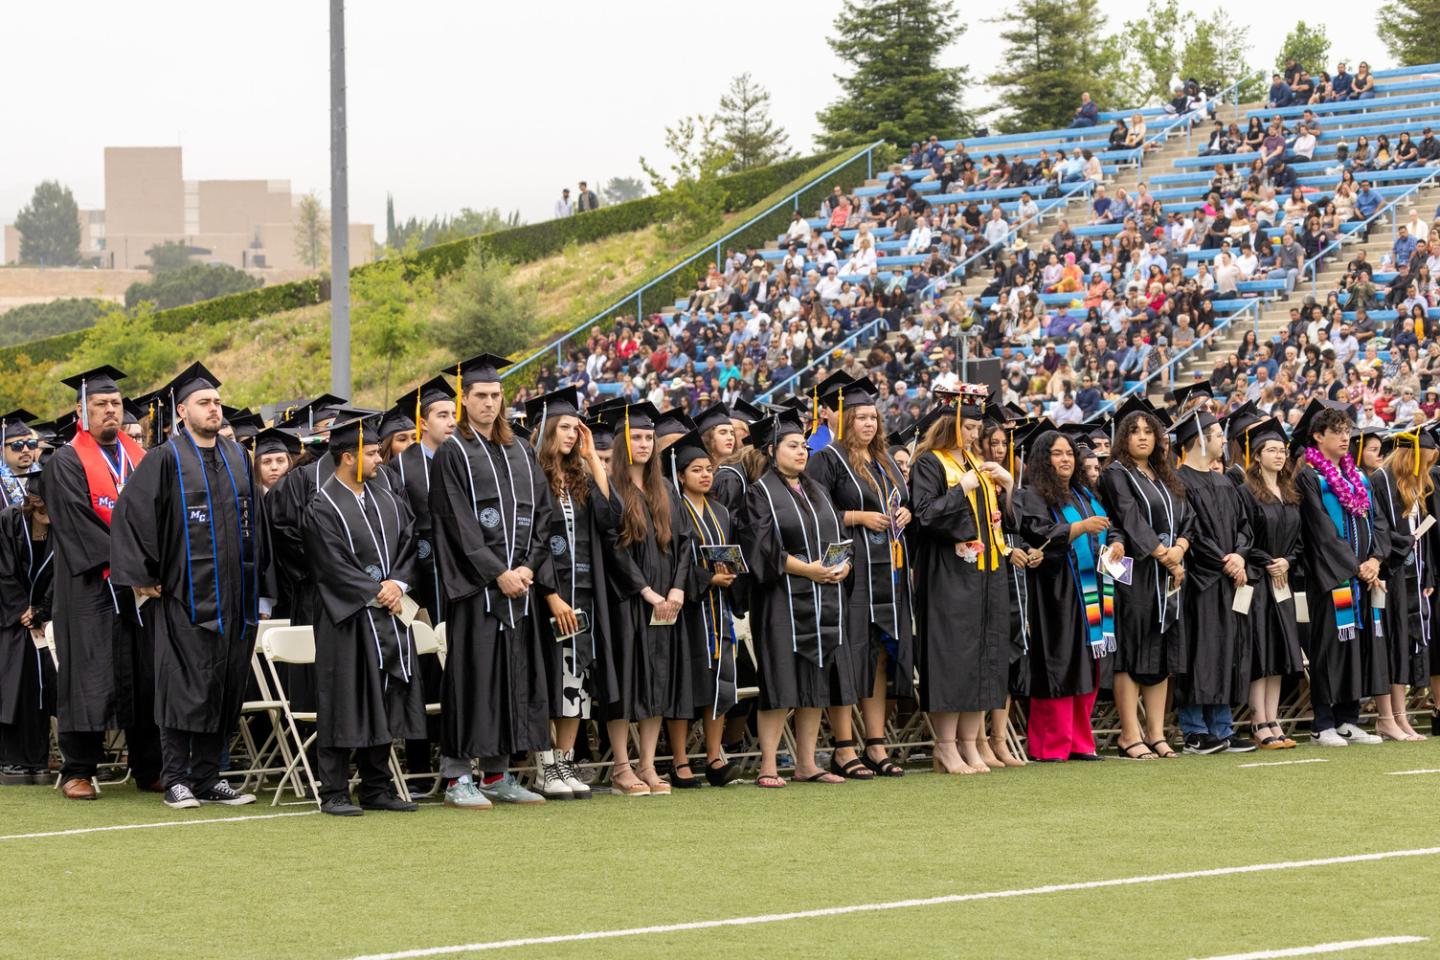 Frequently Asked Questions about Commencement Moorpark College